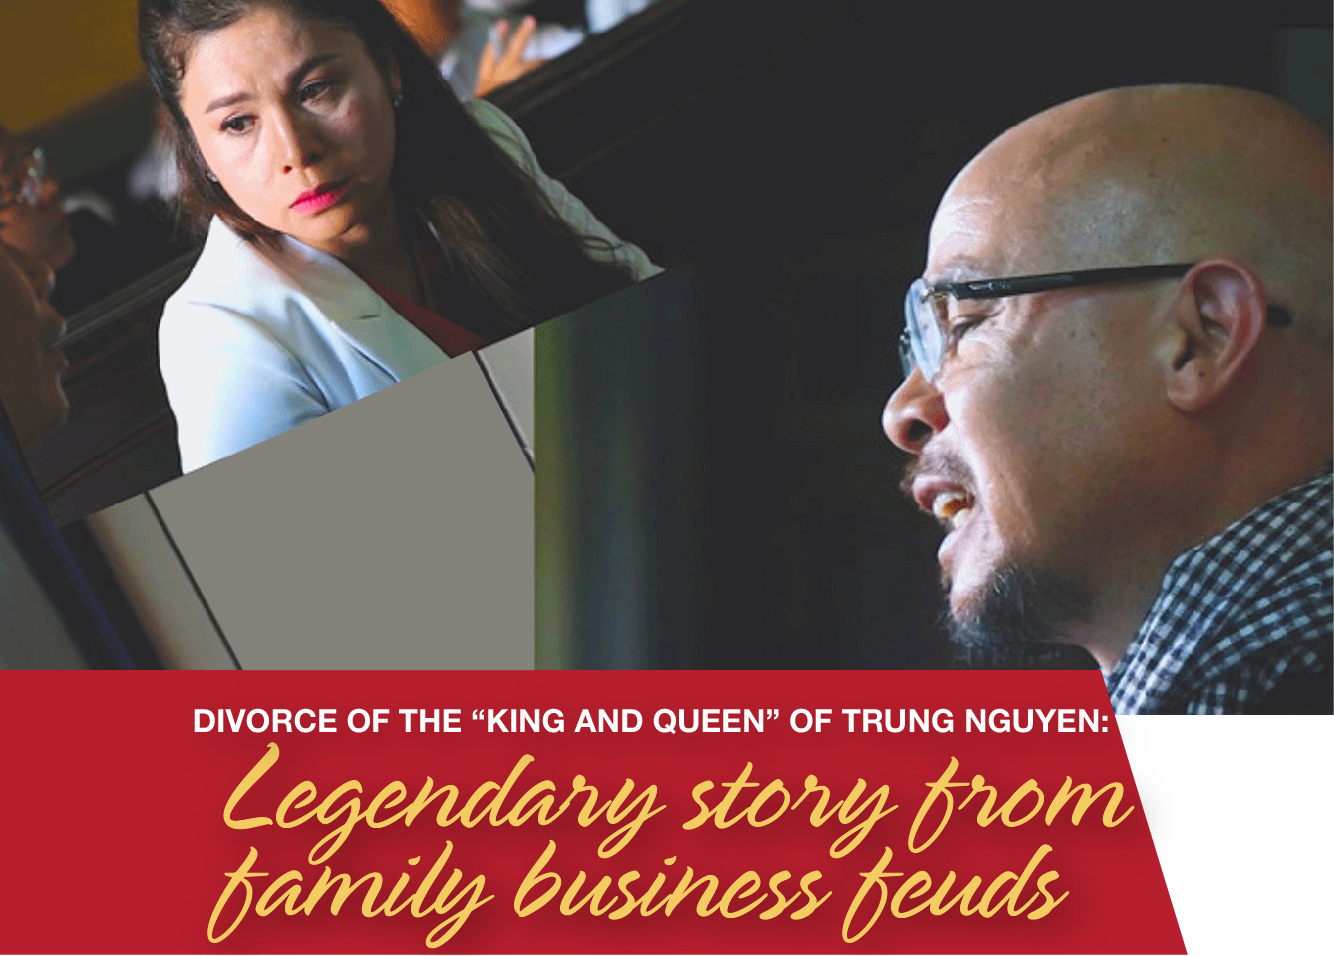 DIVORCE OF THE “KING AND QUEEN” OF TRUNG NGUYEN: WHO WILL BENEFIT?